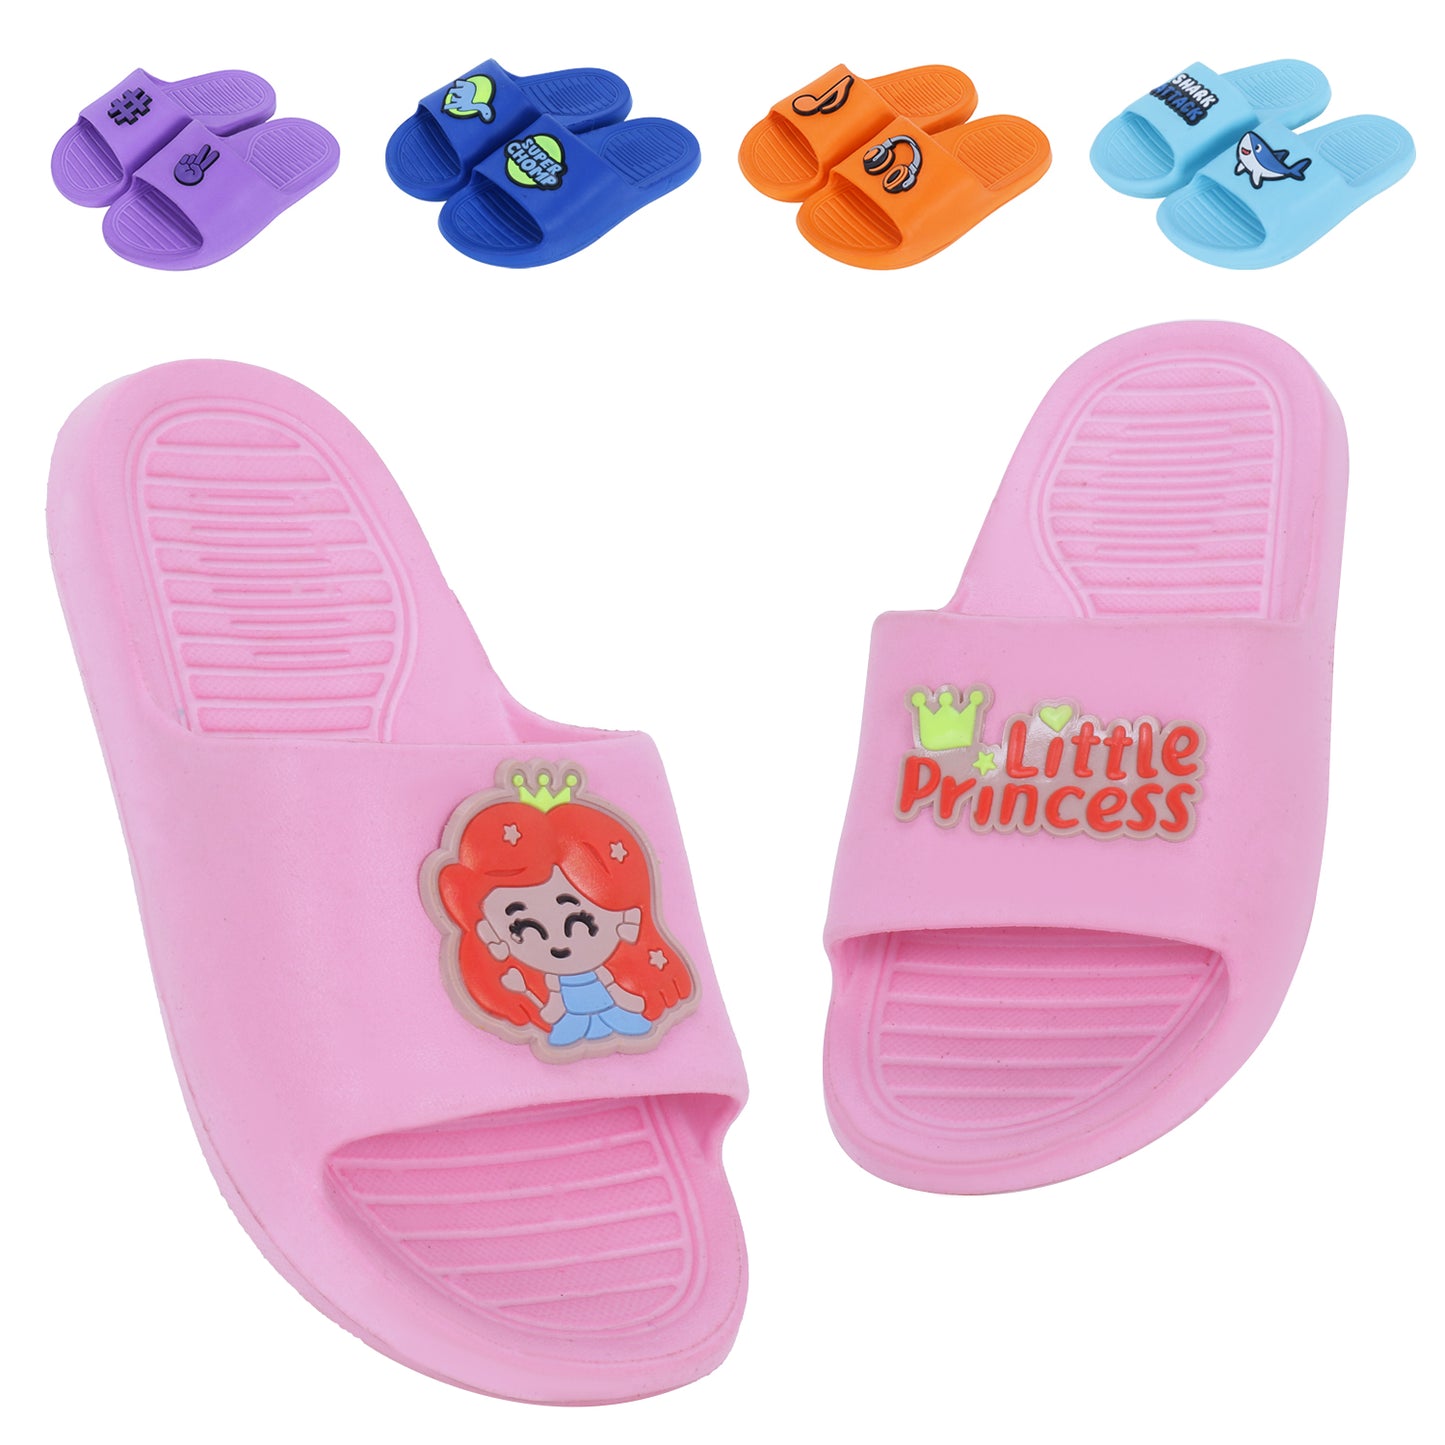 DOCTOR EXTRA SOFT Unisex-Child Kids Flip-Flop D-06 Soft Comfortable Indoor & Outdoor Slippers Stylish Non-Slip Slider For Home Casual Chappals For Boys & Girls